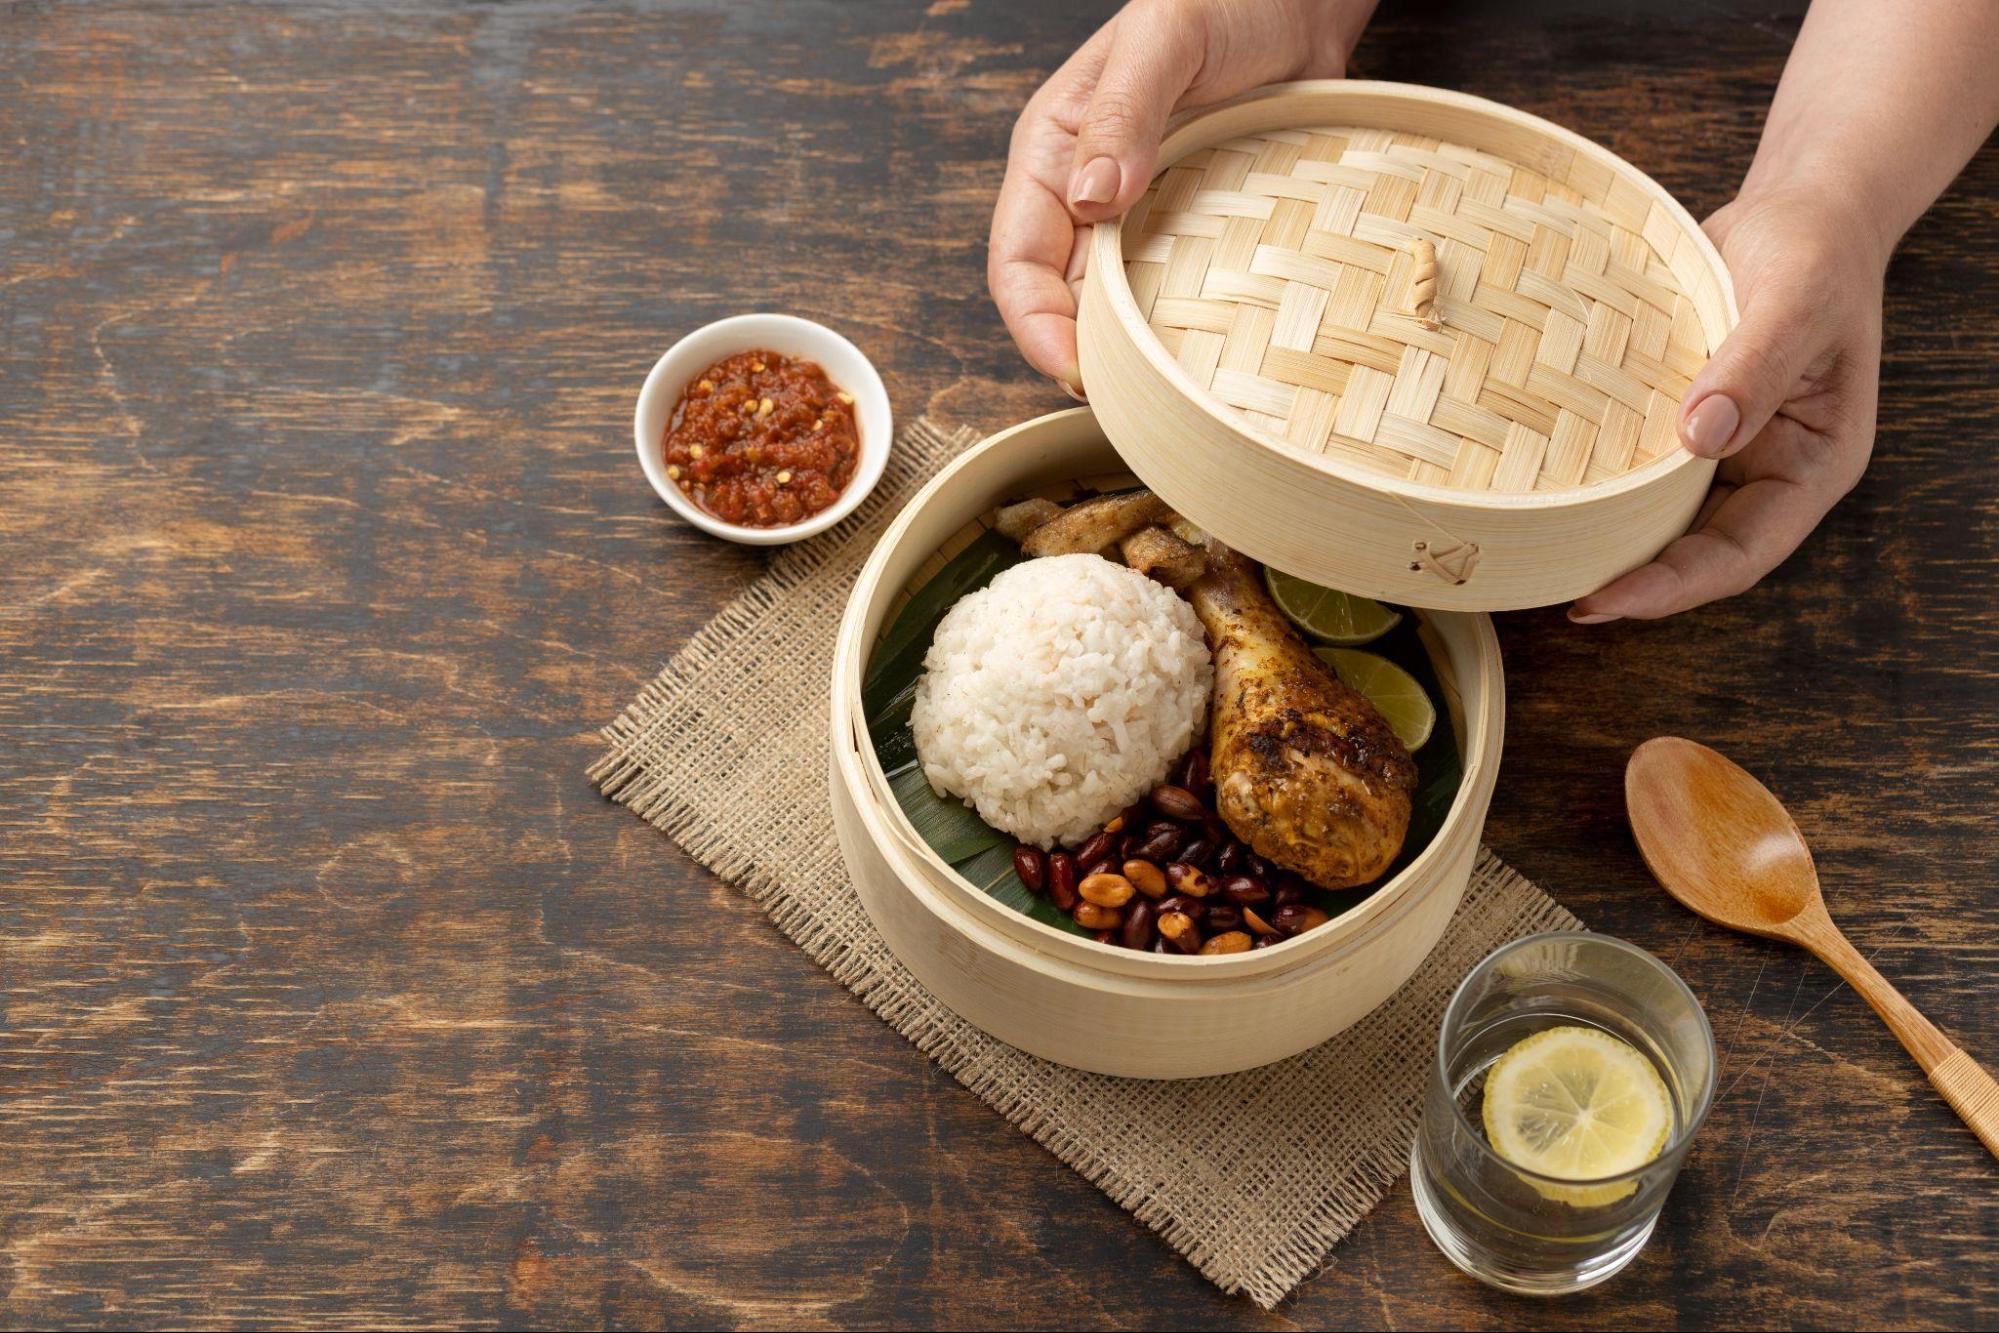 Tips for Successfully Establishing a Sundanese-themed Restaurant: What Should Be Prepared?